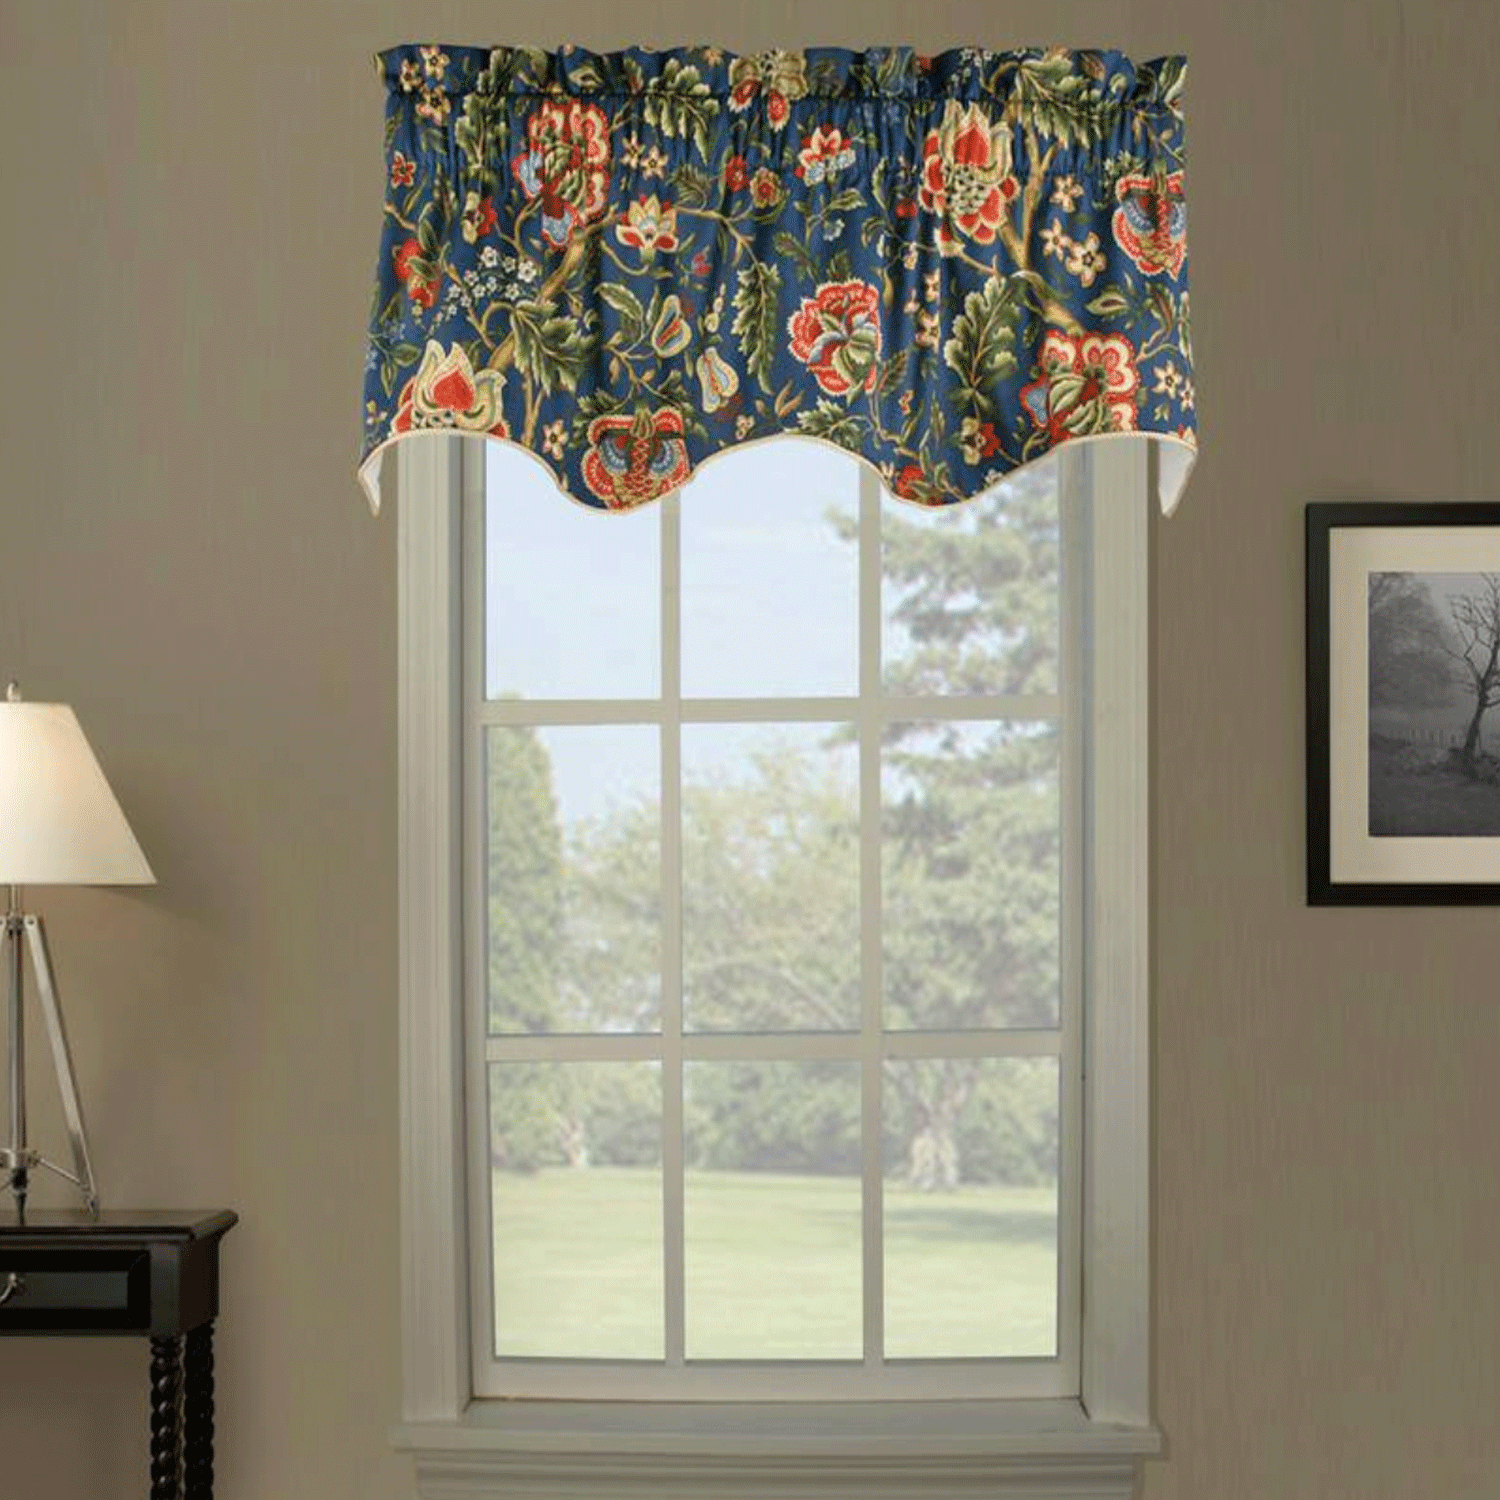 Ellis Curtain Meadow 22 in. L Polyester Lined Tie-Up Valance in